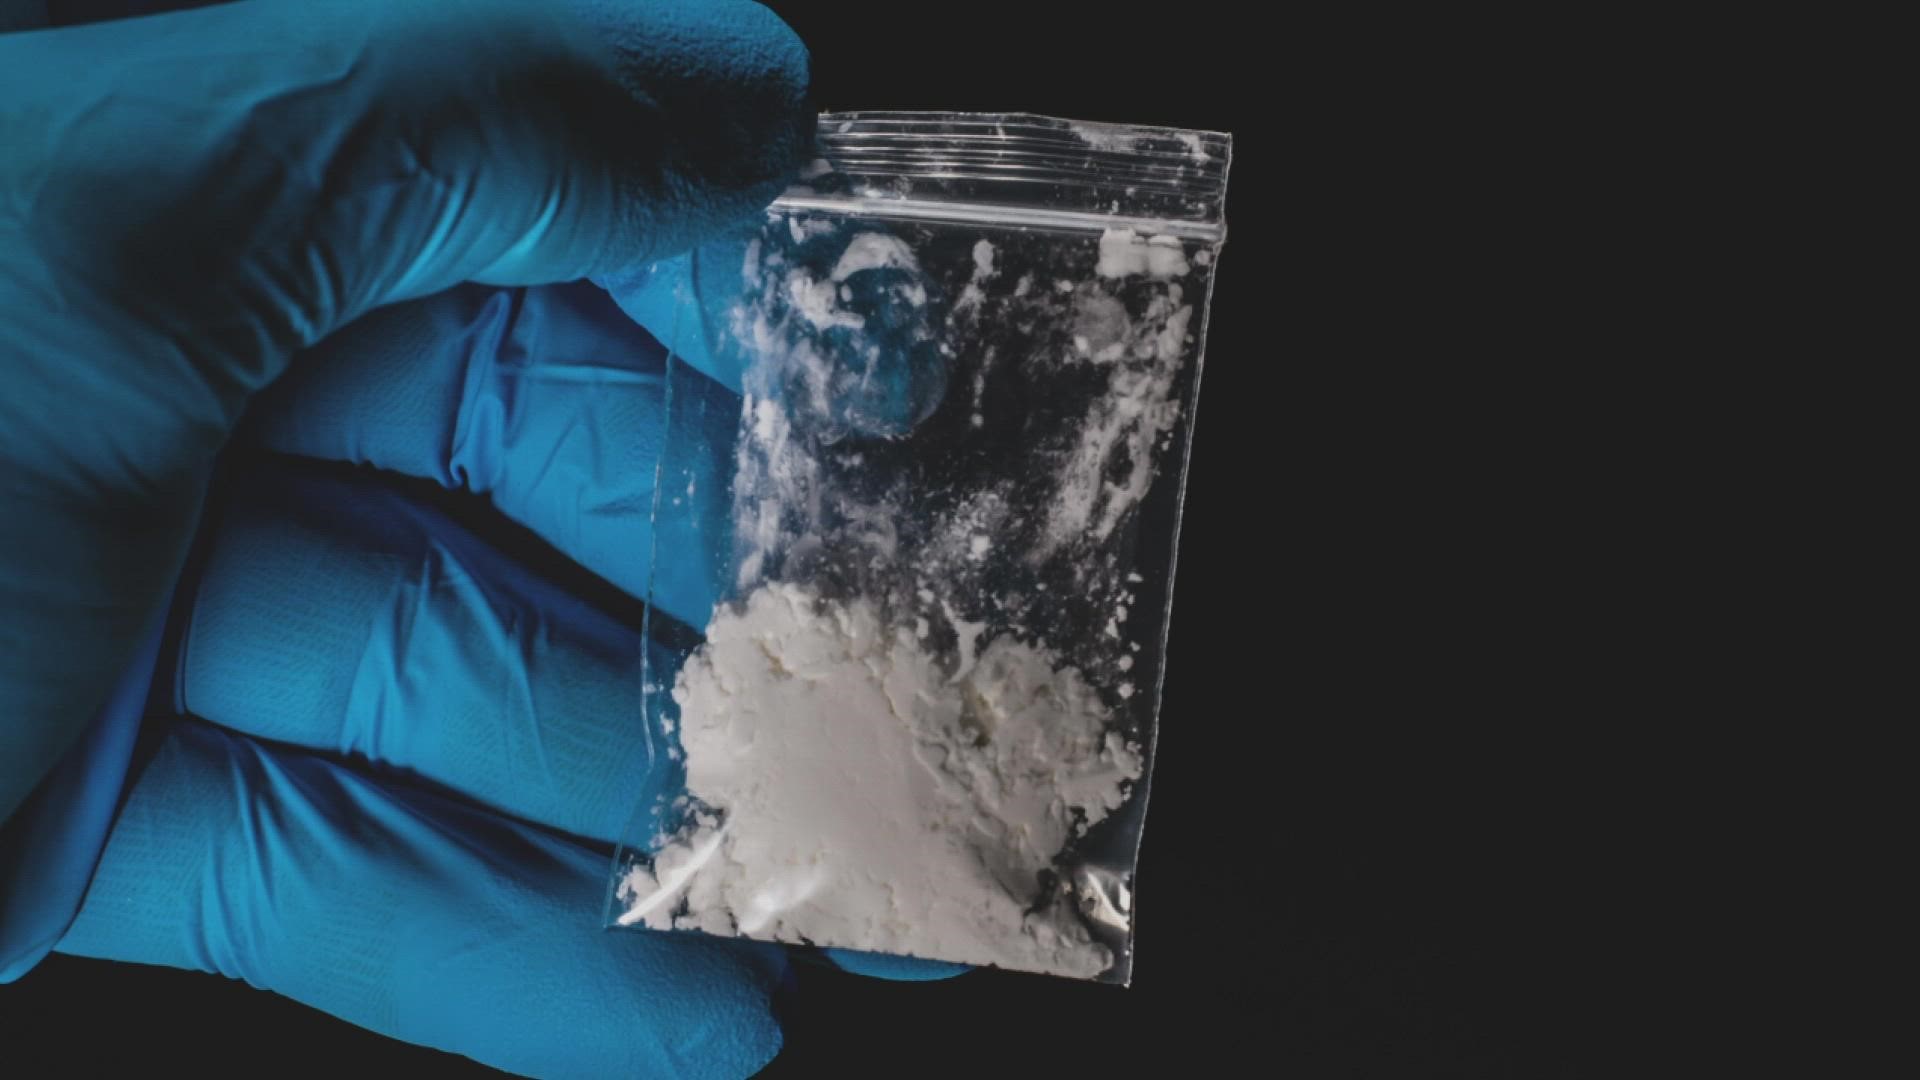 The Rockingham County Sheriff’s Office says they seized enough fentanyl to kill 139,000 people last week. It’s part of a larger problem impacting the Triad.